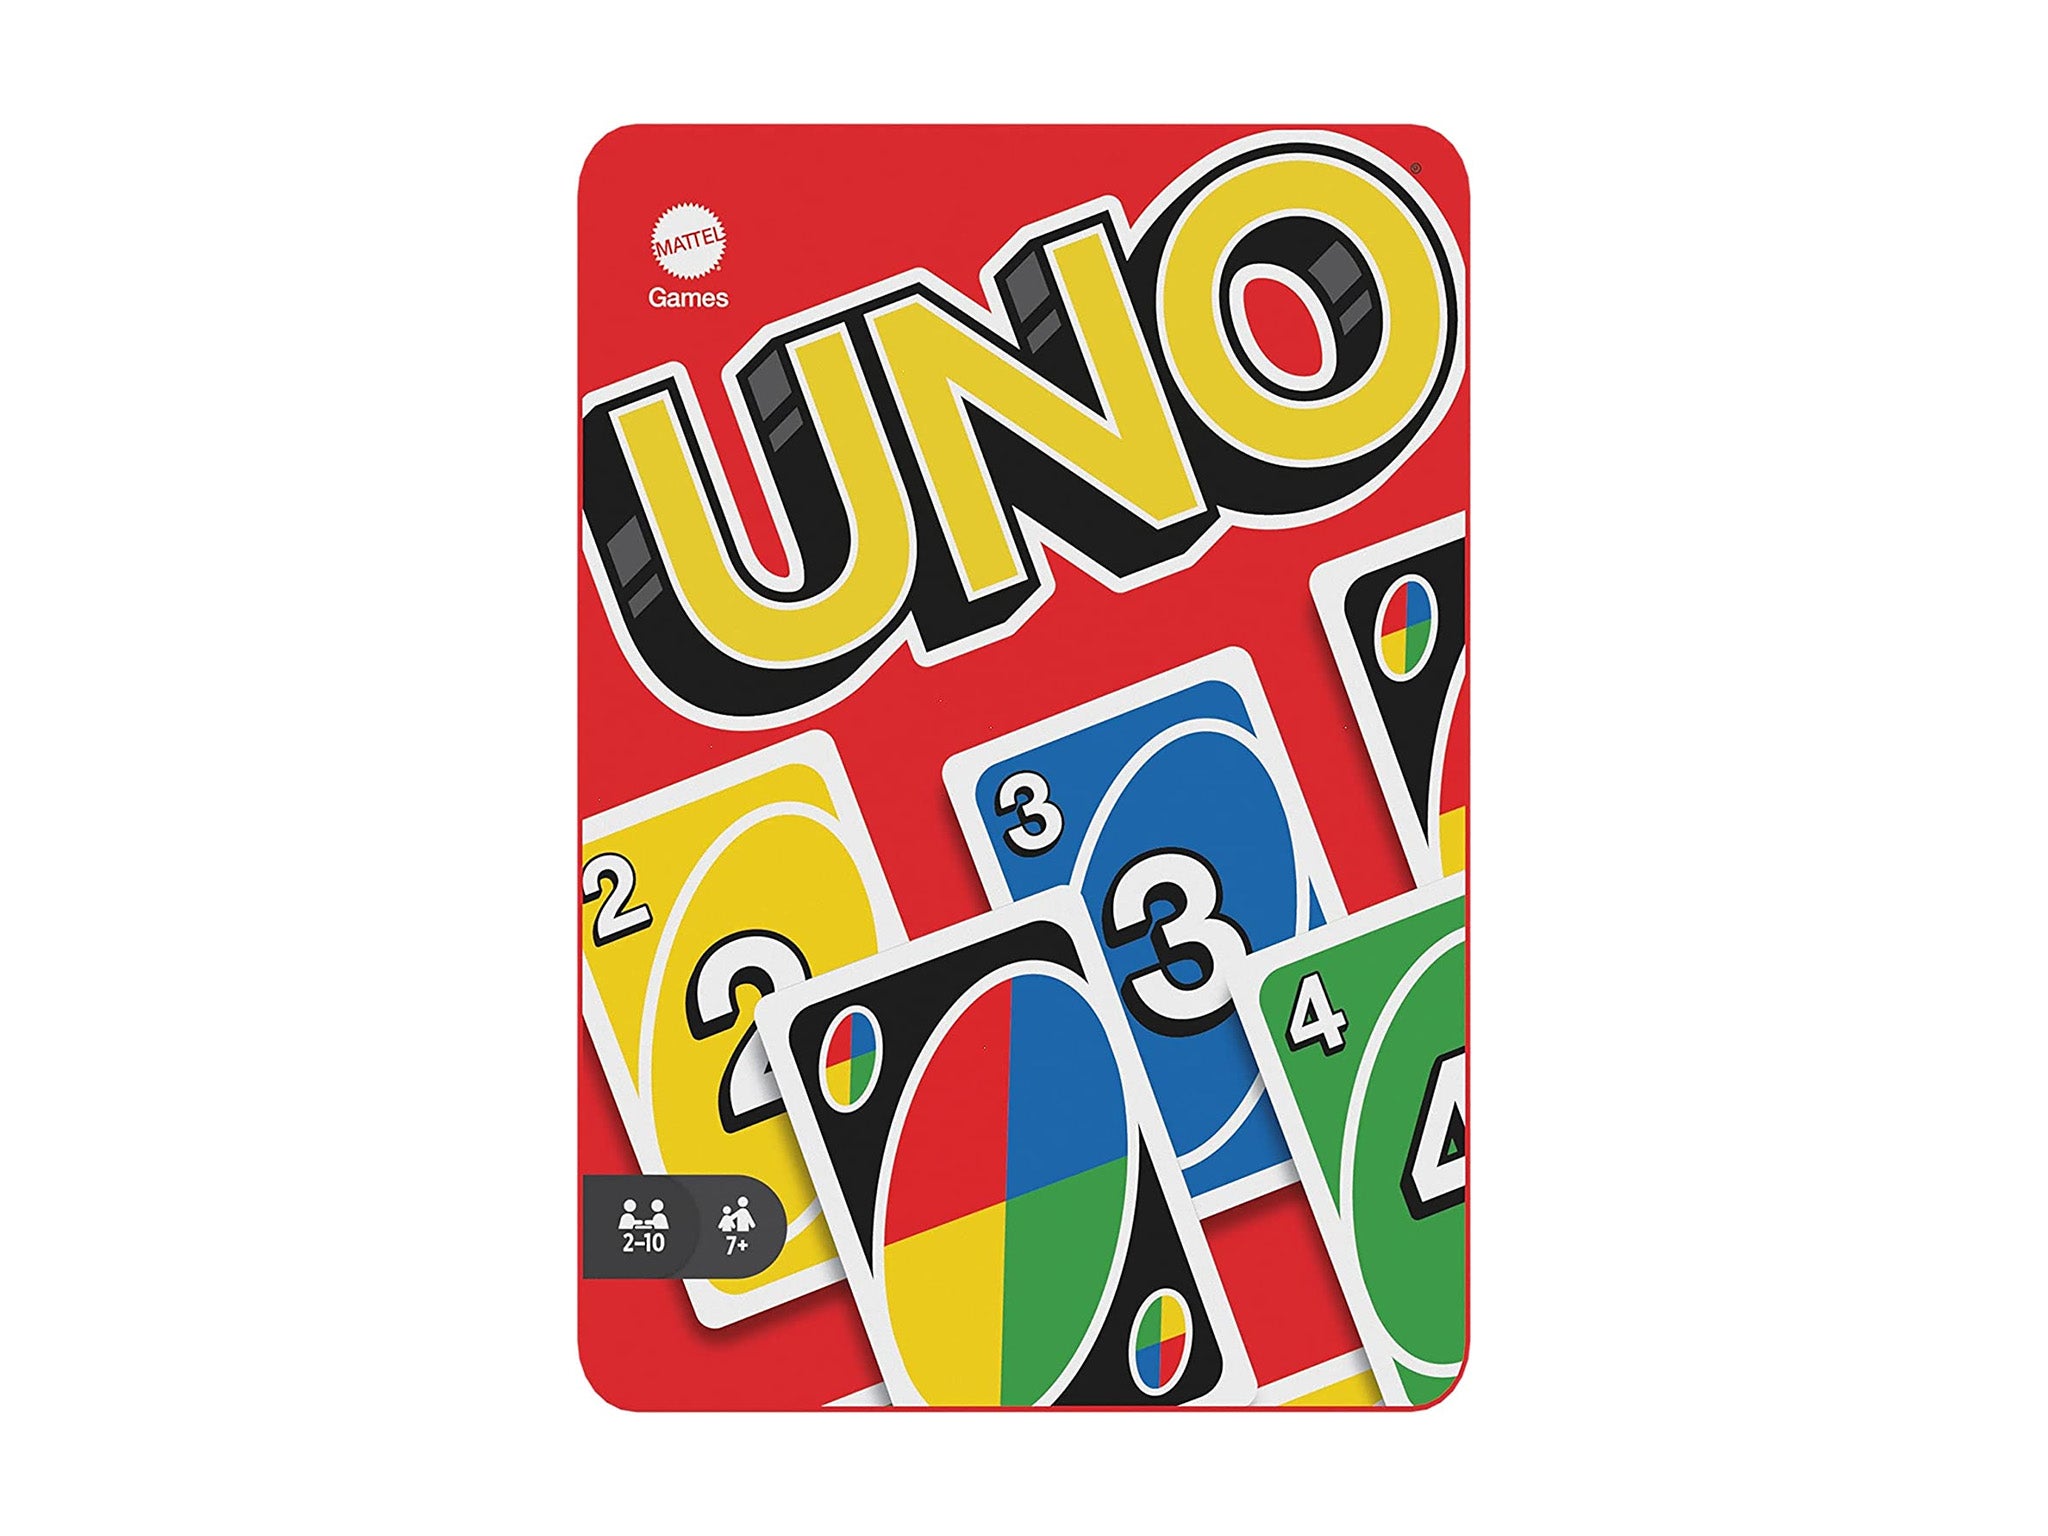 New Mattel job pays $17,000 to play UNO for a month—How to apply